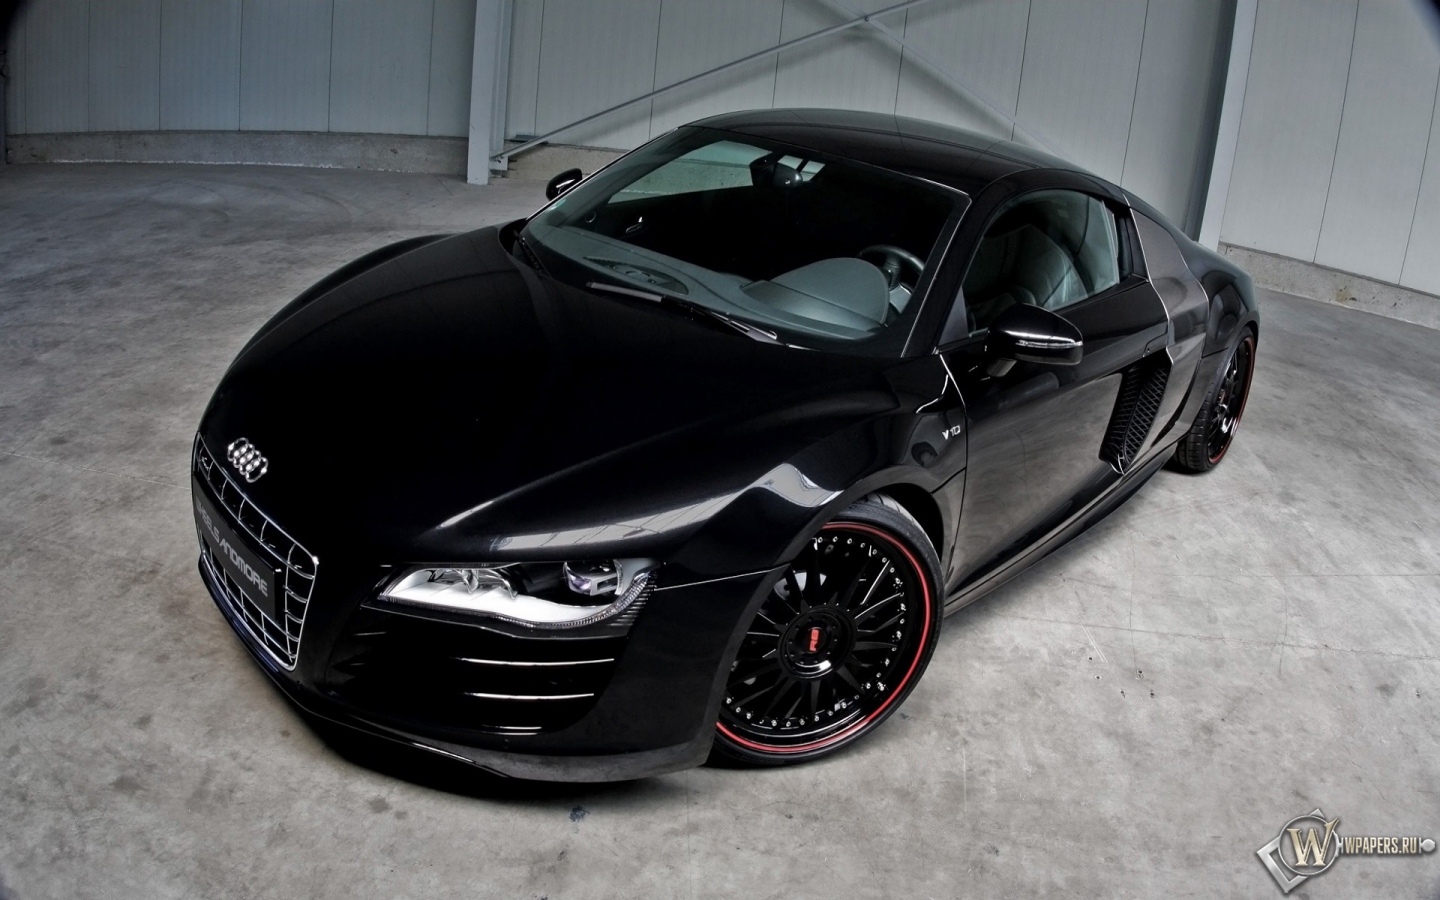 2011 Wheelsandmore Audi R8 V10 .6 - Front Angle Top 1440x900